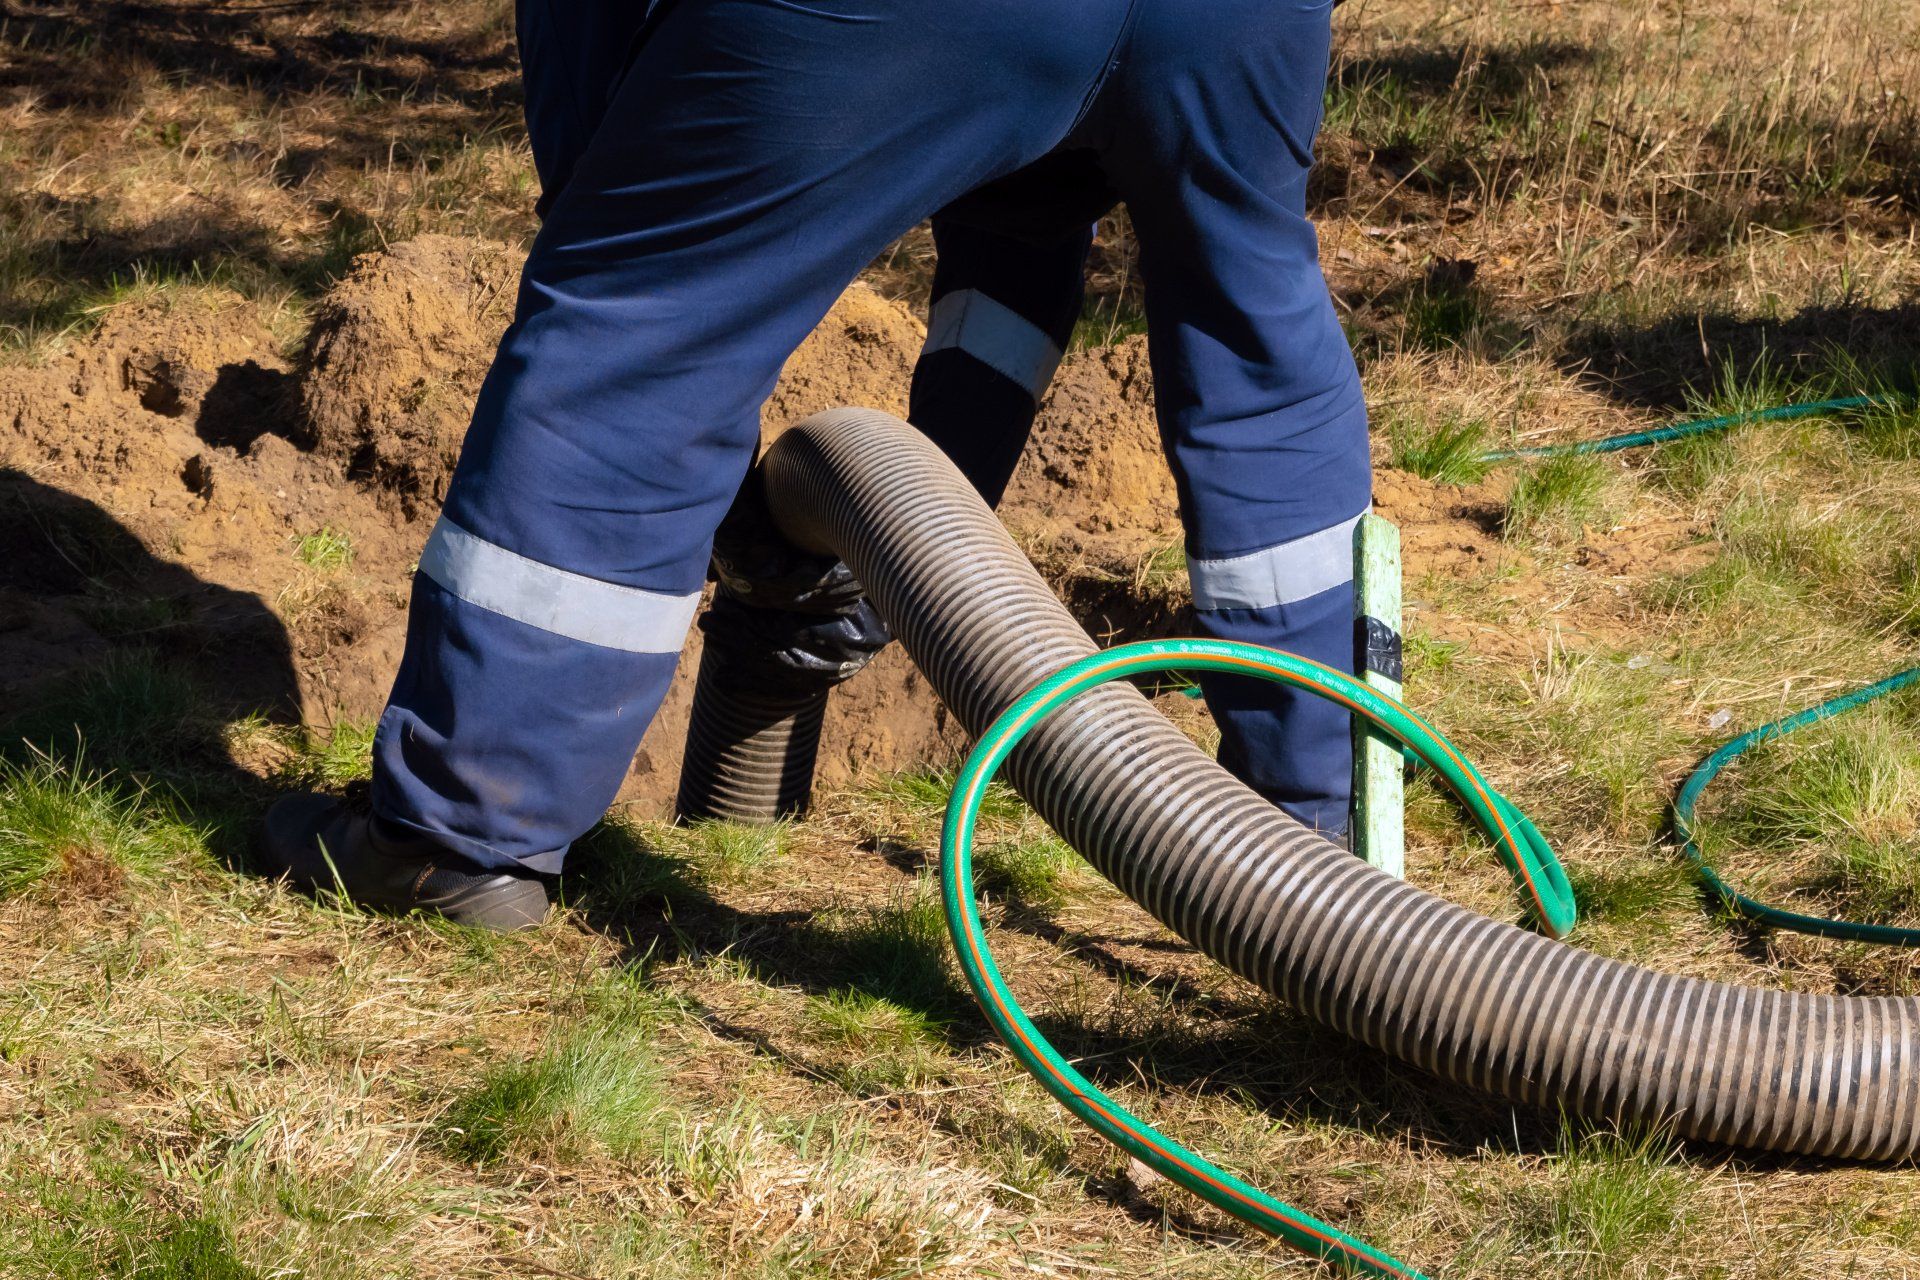 A man wearing protective gear and holding a pipe while providing sewer cleaning service outdoors.